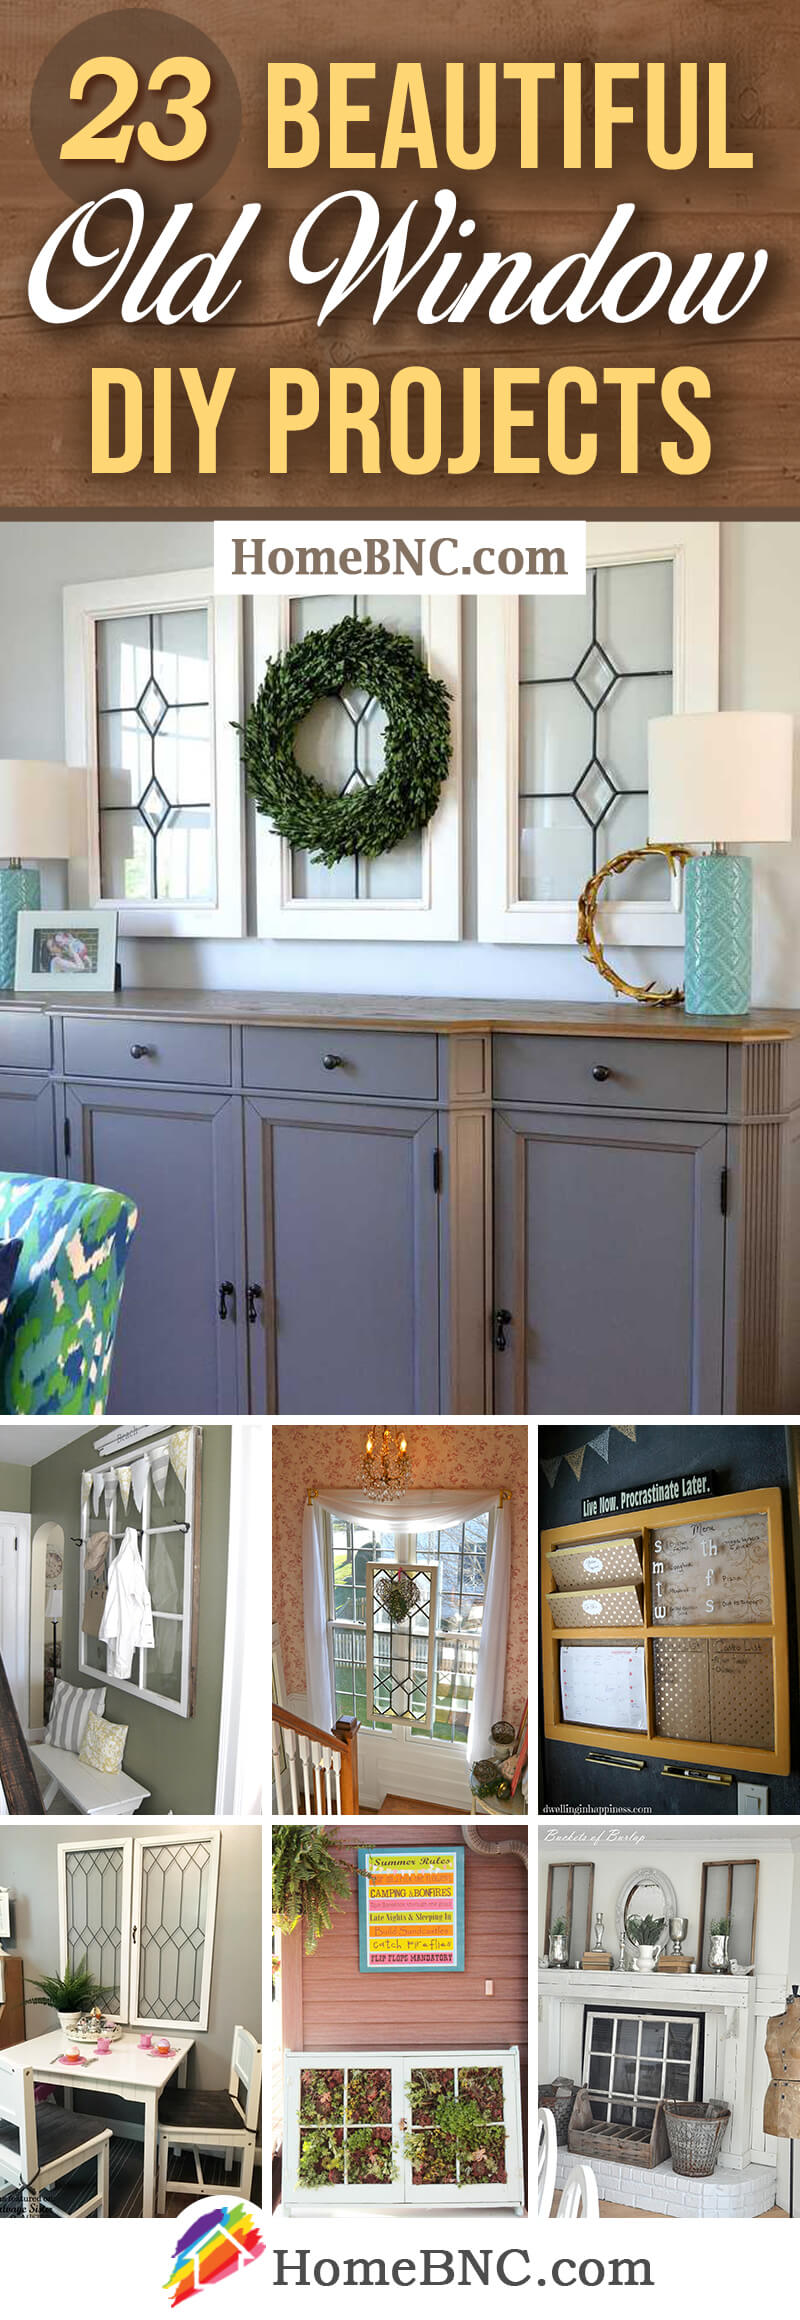 23 Best Old Window DIY Projects that Invites Warmth in 2020